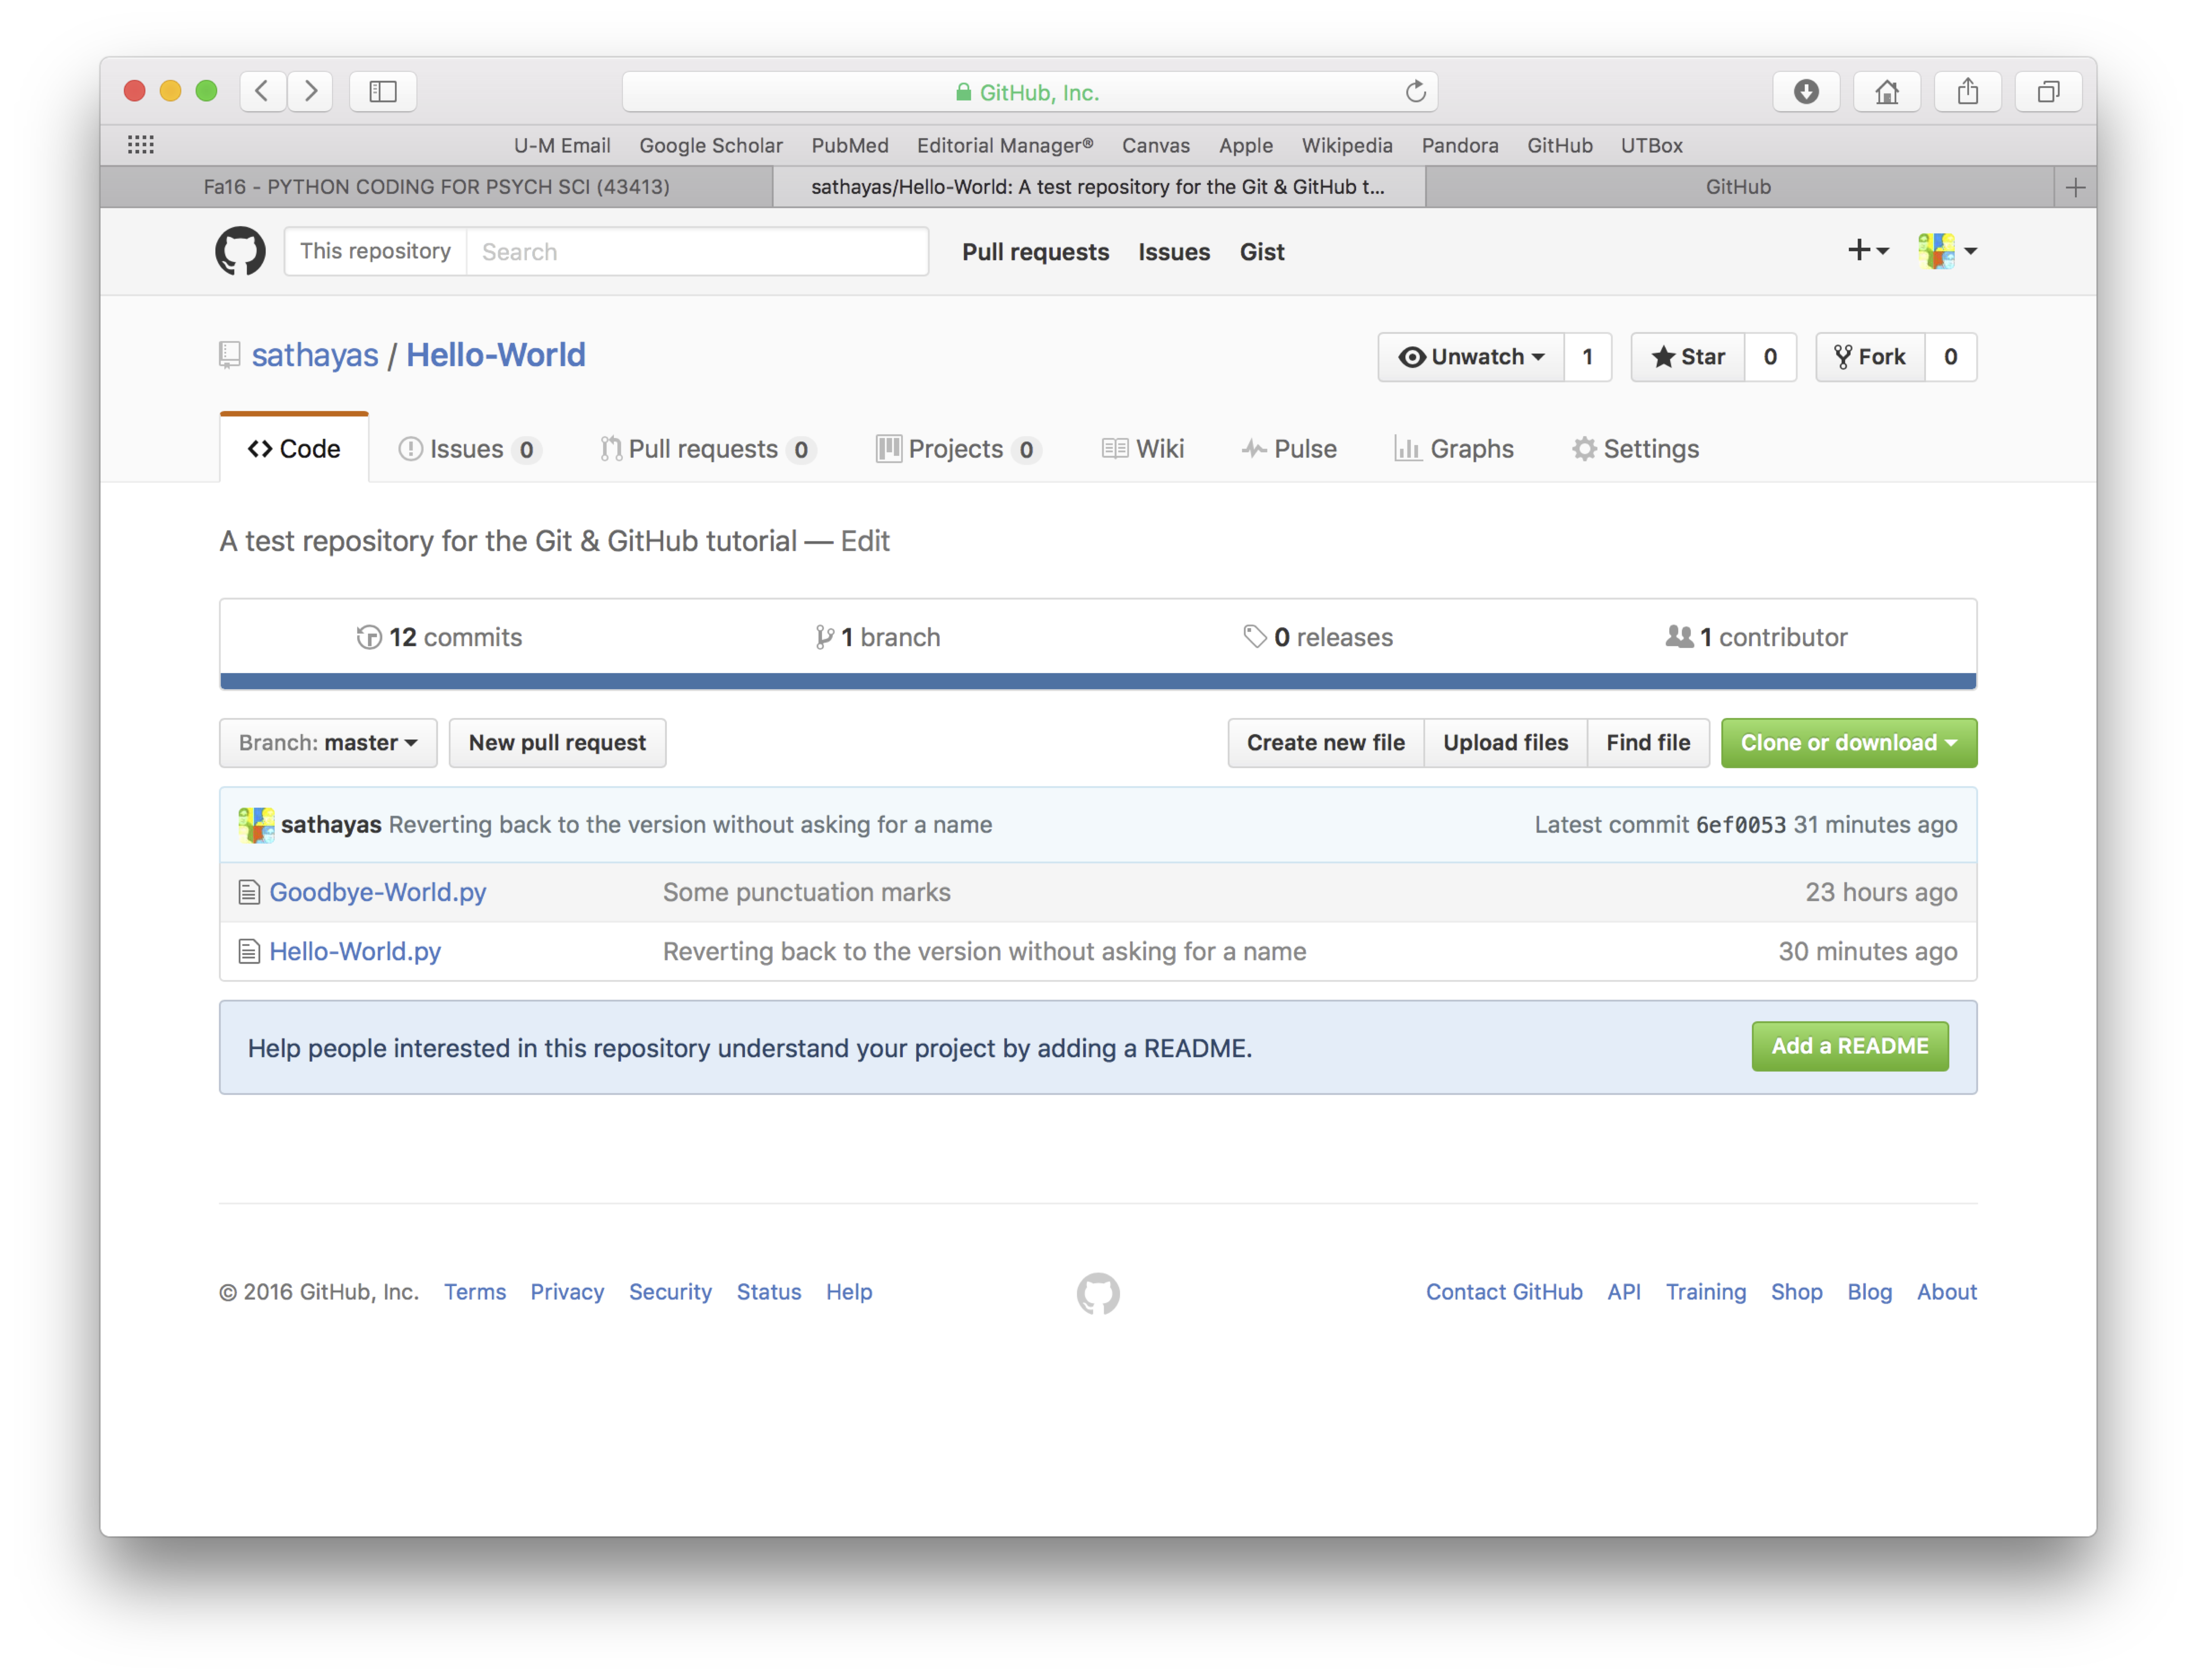 Screenshot, showing the content of a new GitHub repository